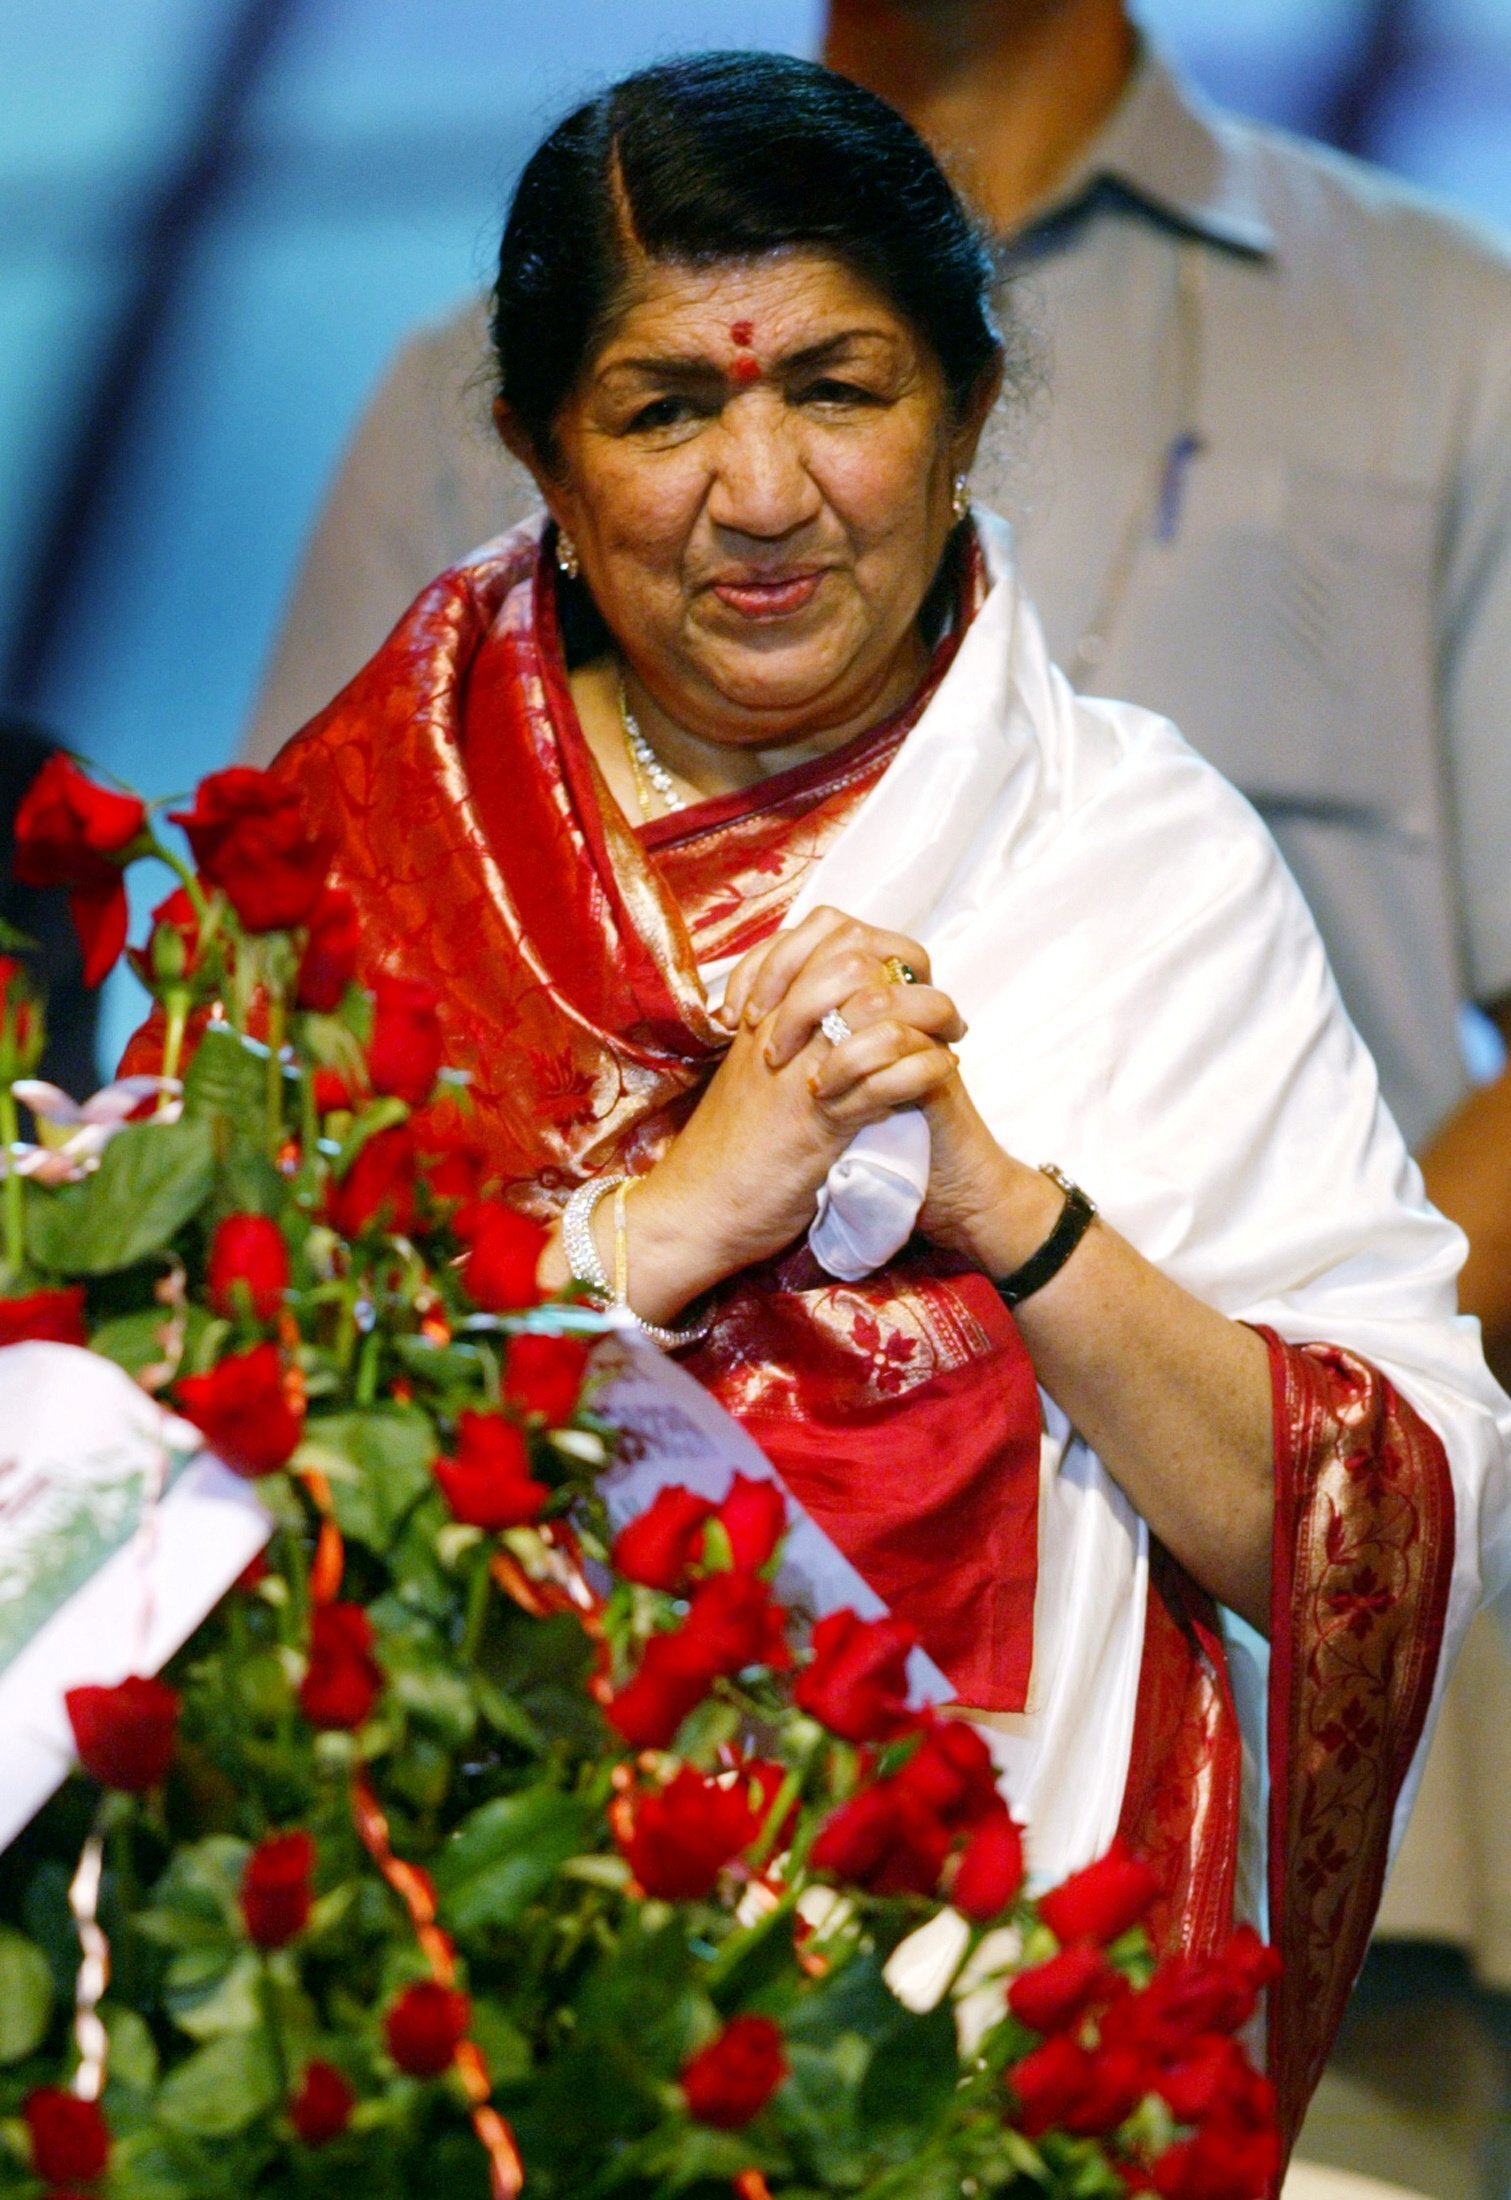 Lata Mangeshkar receives a bouquet of flowers to celebrate her 75th birthday in 2003. Photo: Reuters